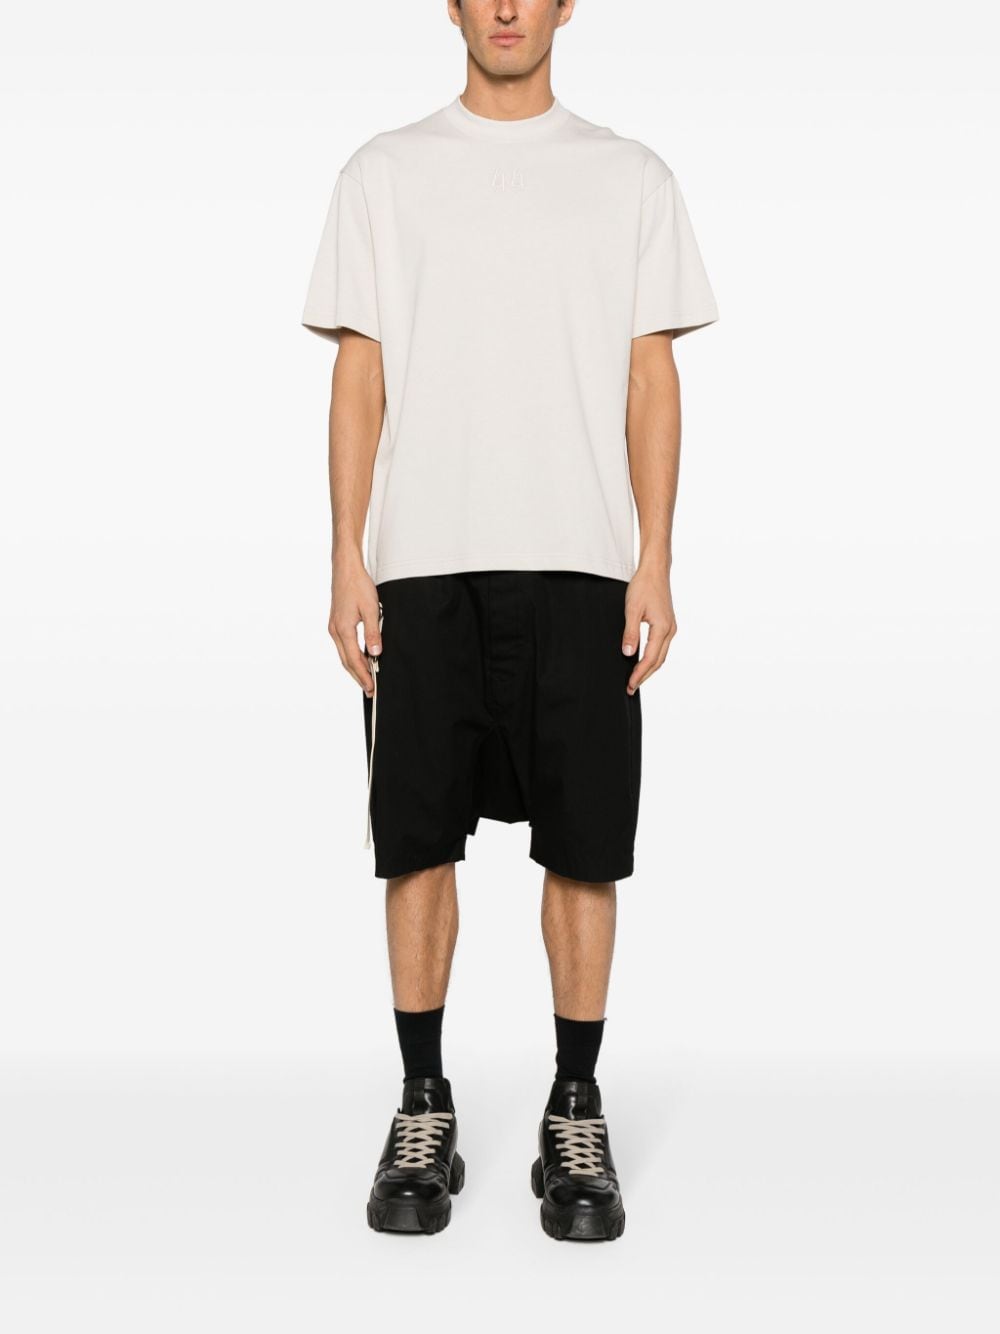 Dirty white t-shirt with black logo